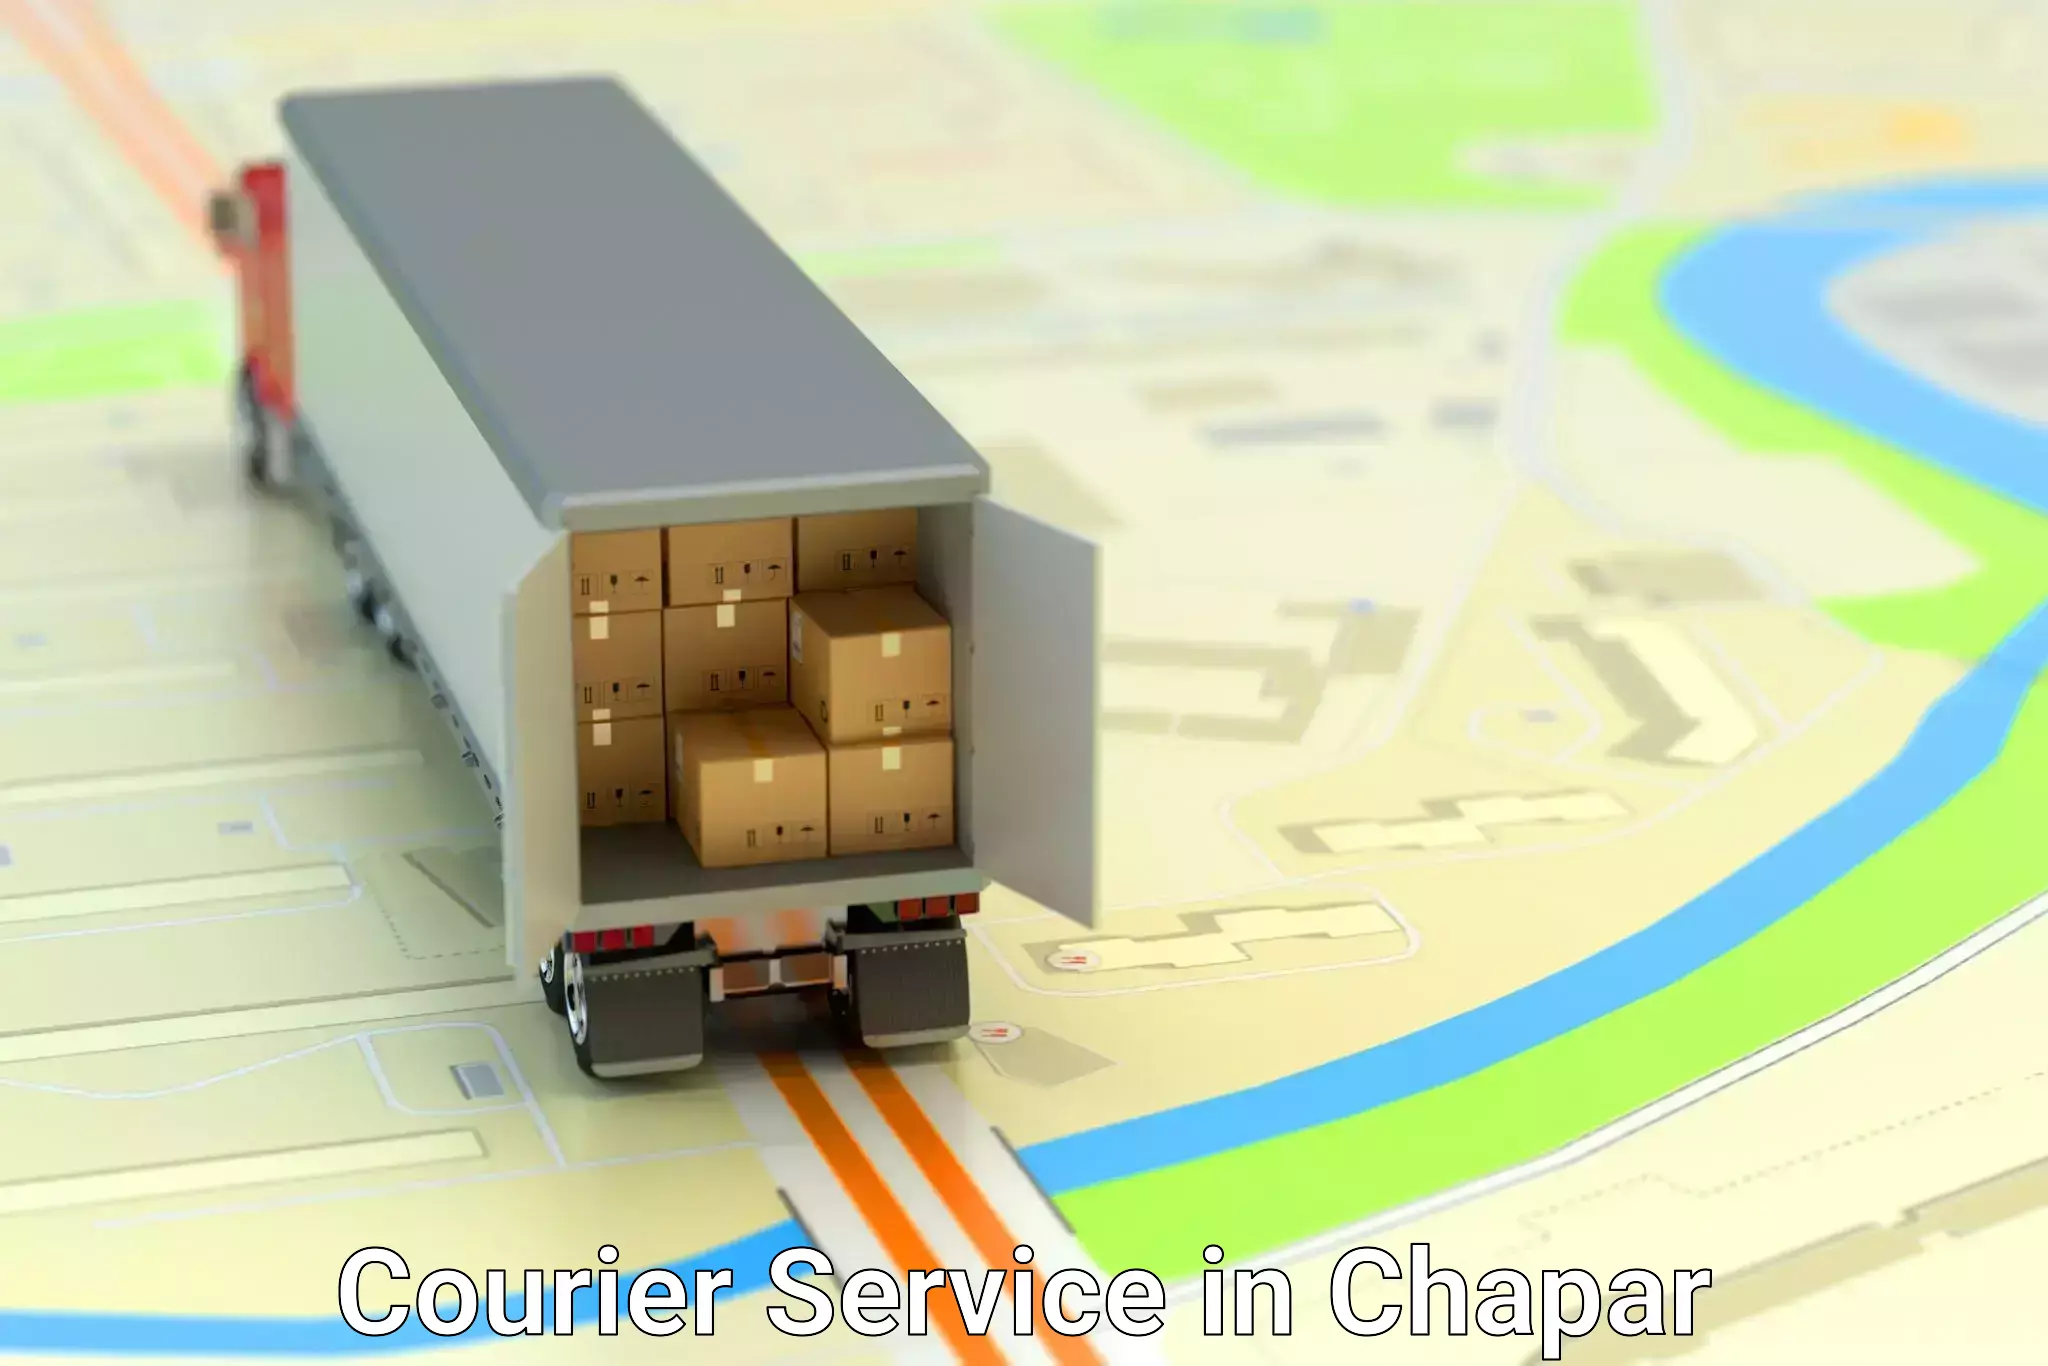 Round-the-clock parcel delivery in Chapar